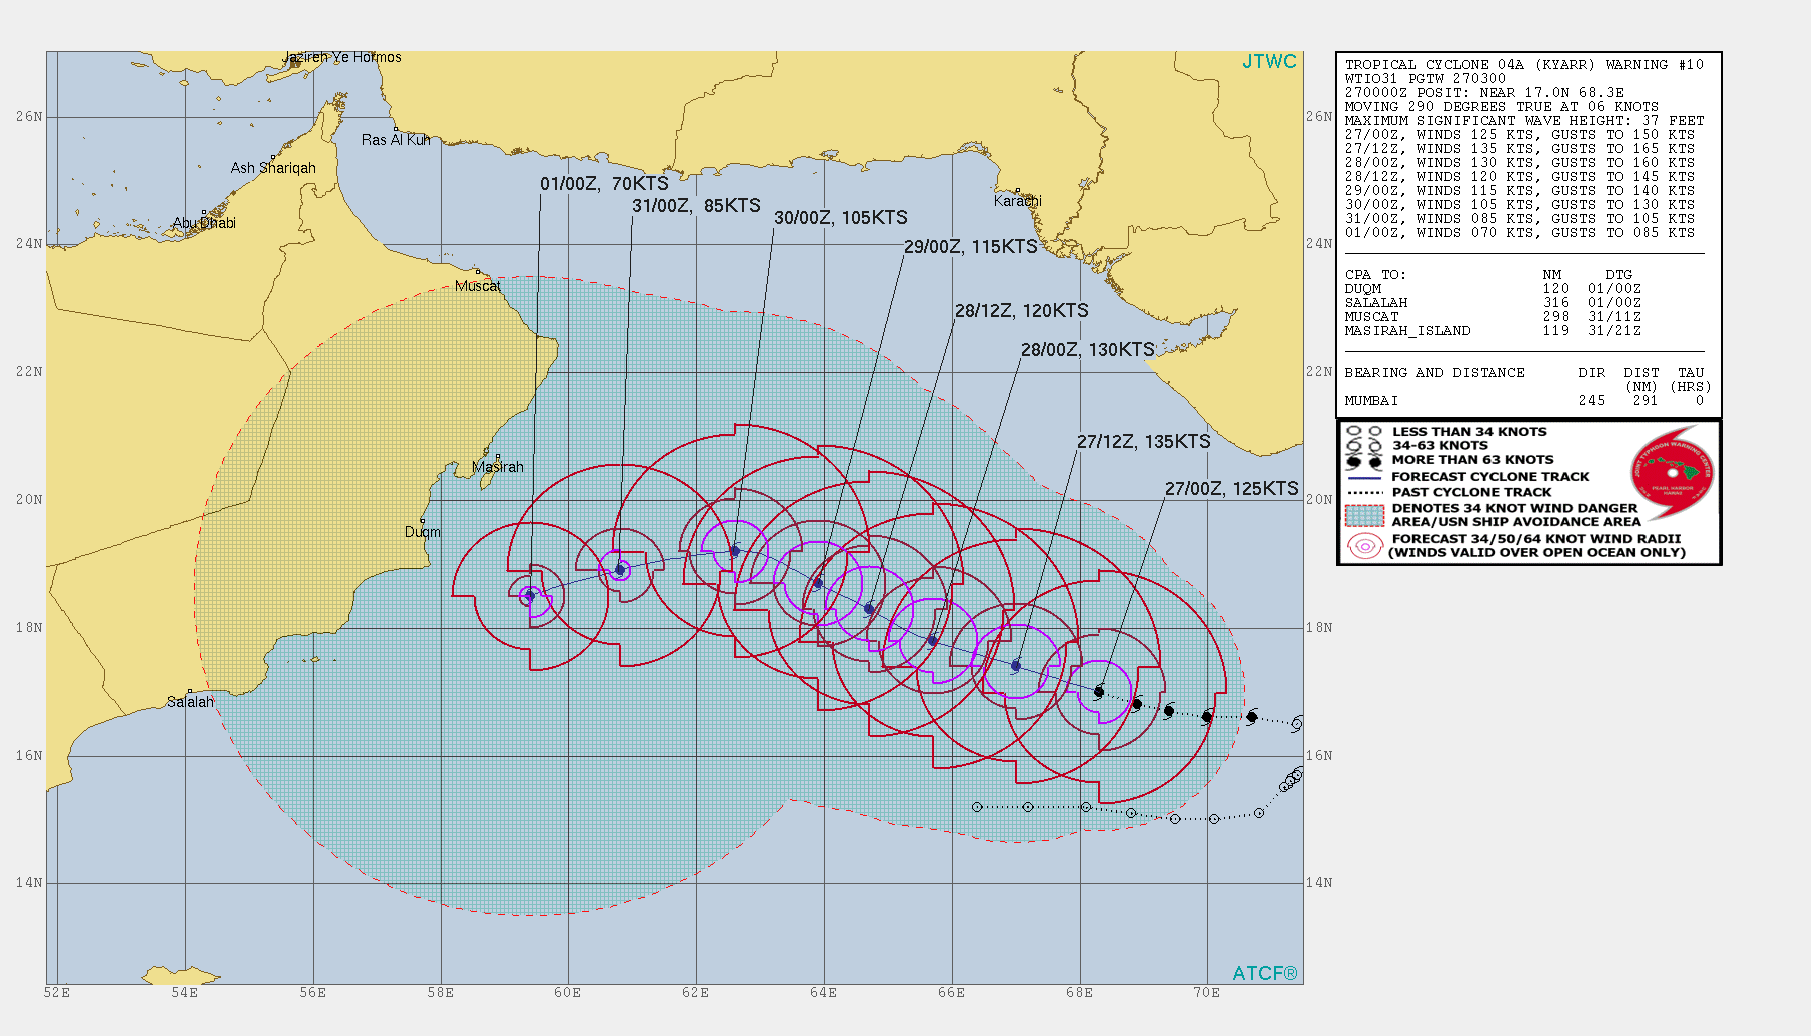 PEAK INTENSITY OF 135KTS(SUPER CYCLONE) FORECAST WITHIN 12H